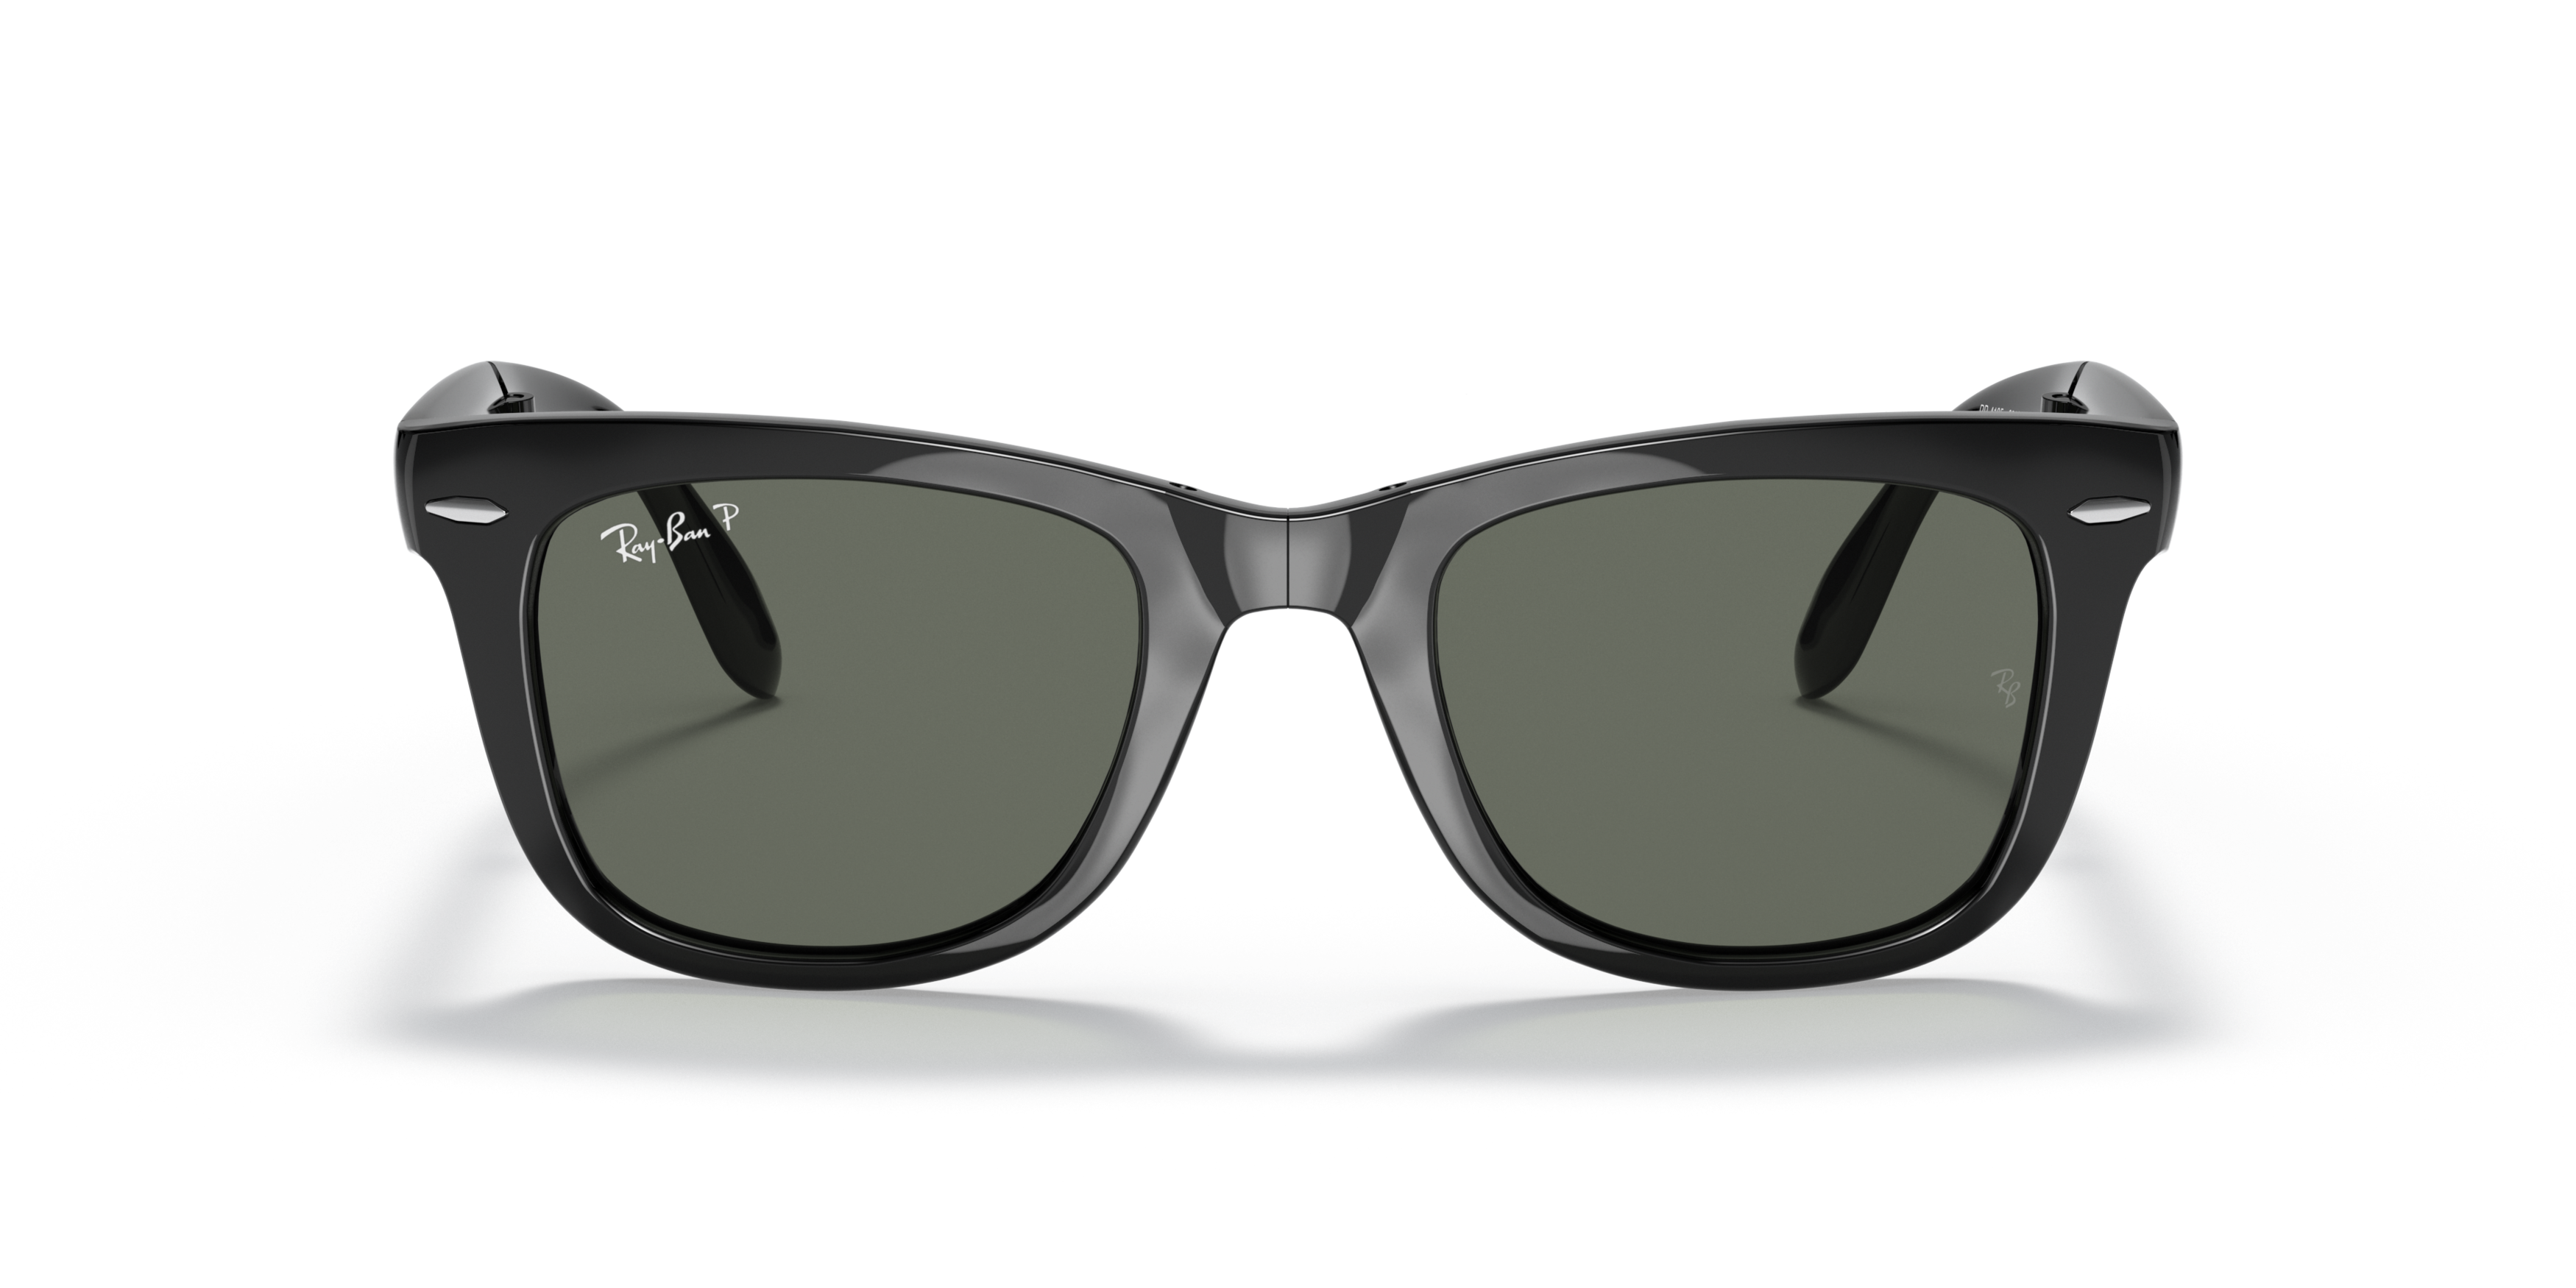 [products.image.front] Ray-Ban Wayfarer Folding Classic RB4105 601/58